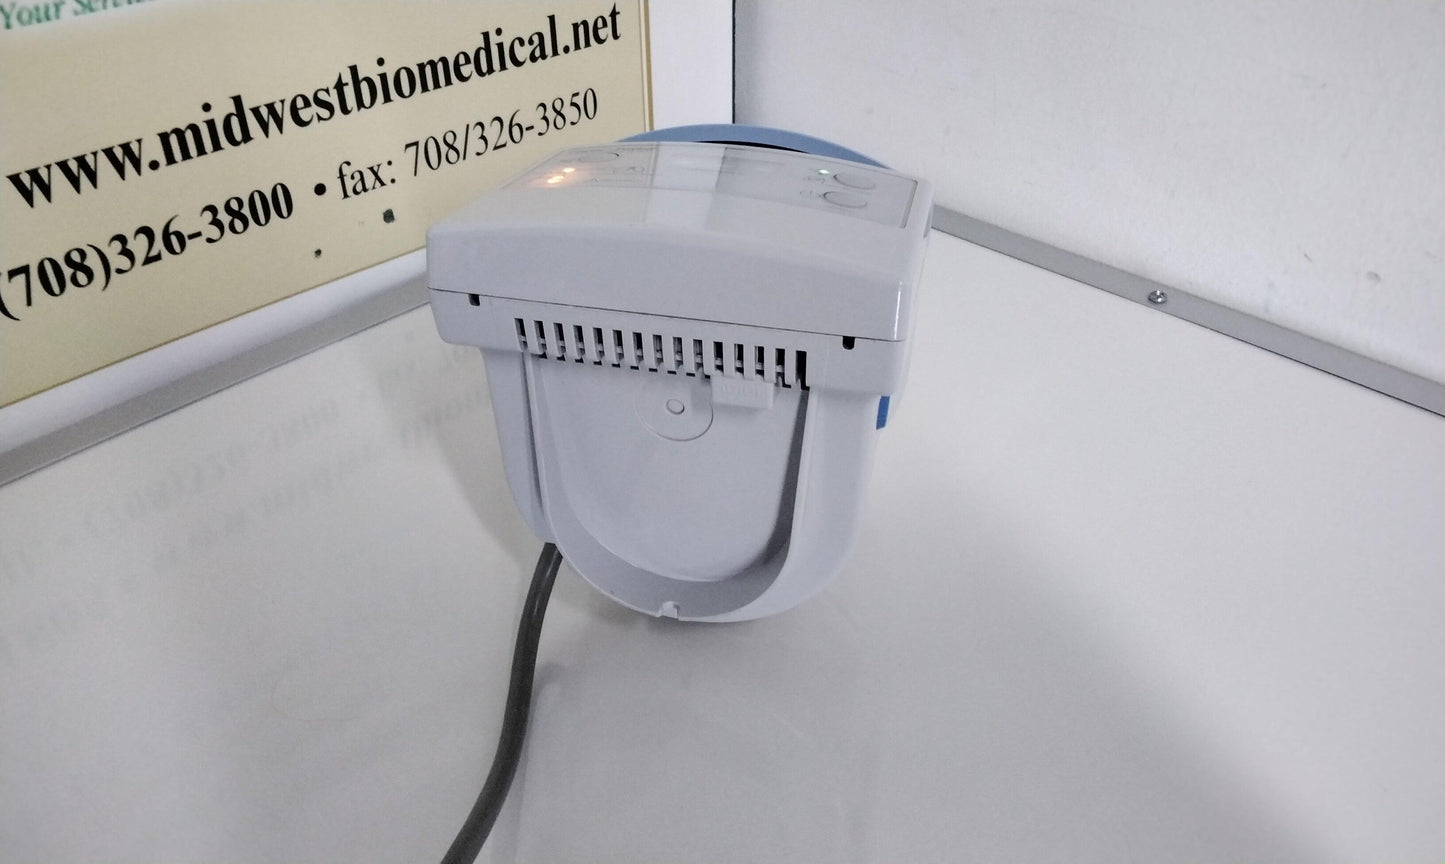 REFURBISHED Fisher & Paykel Heated Respiratory Humidifier MR850JHU with Shipping and Warranty - MBR Medicals